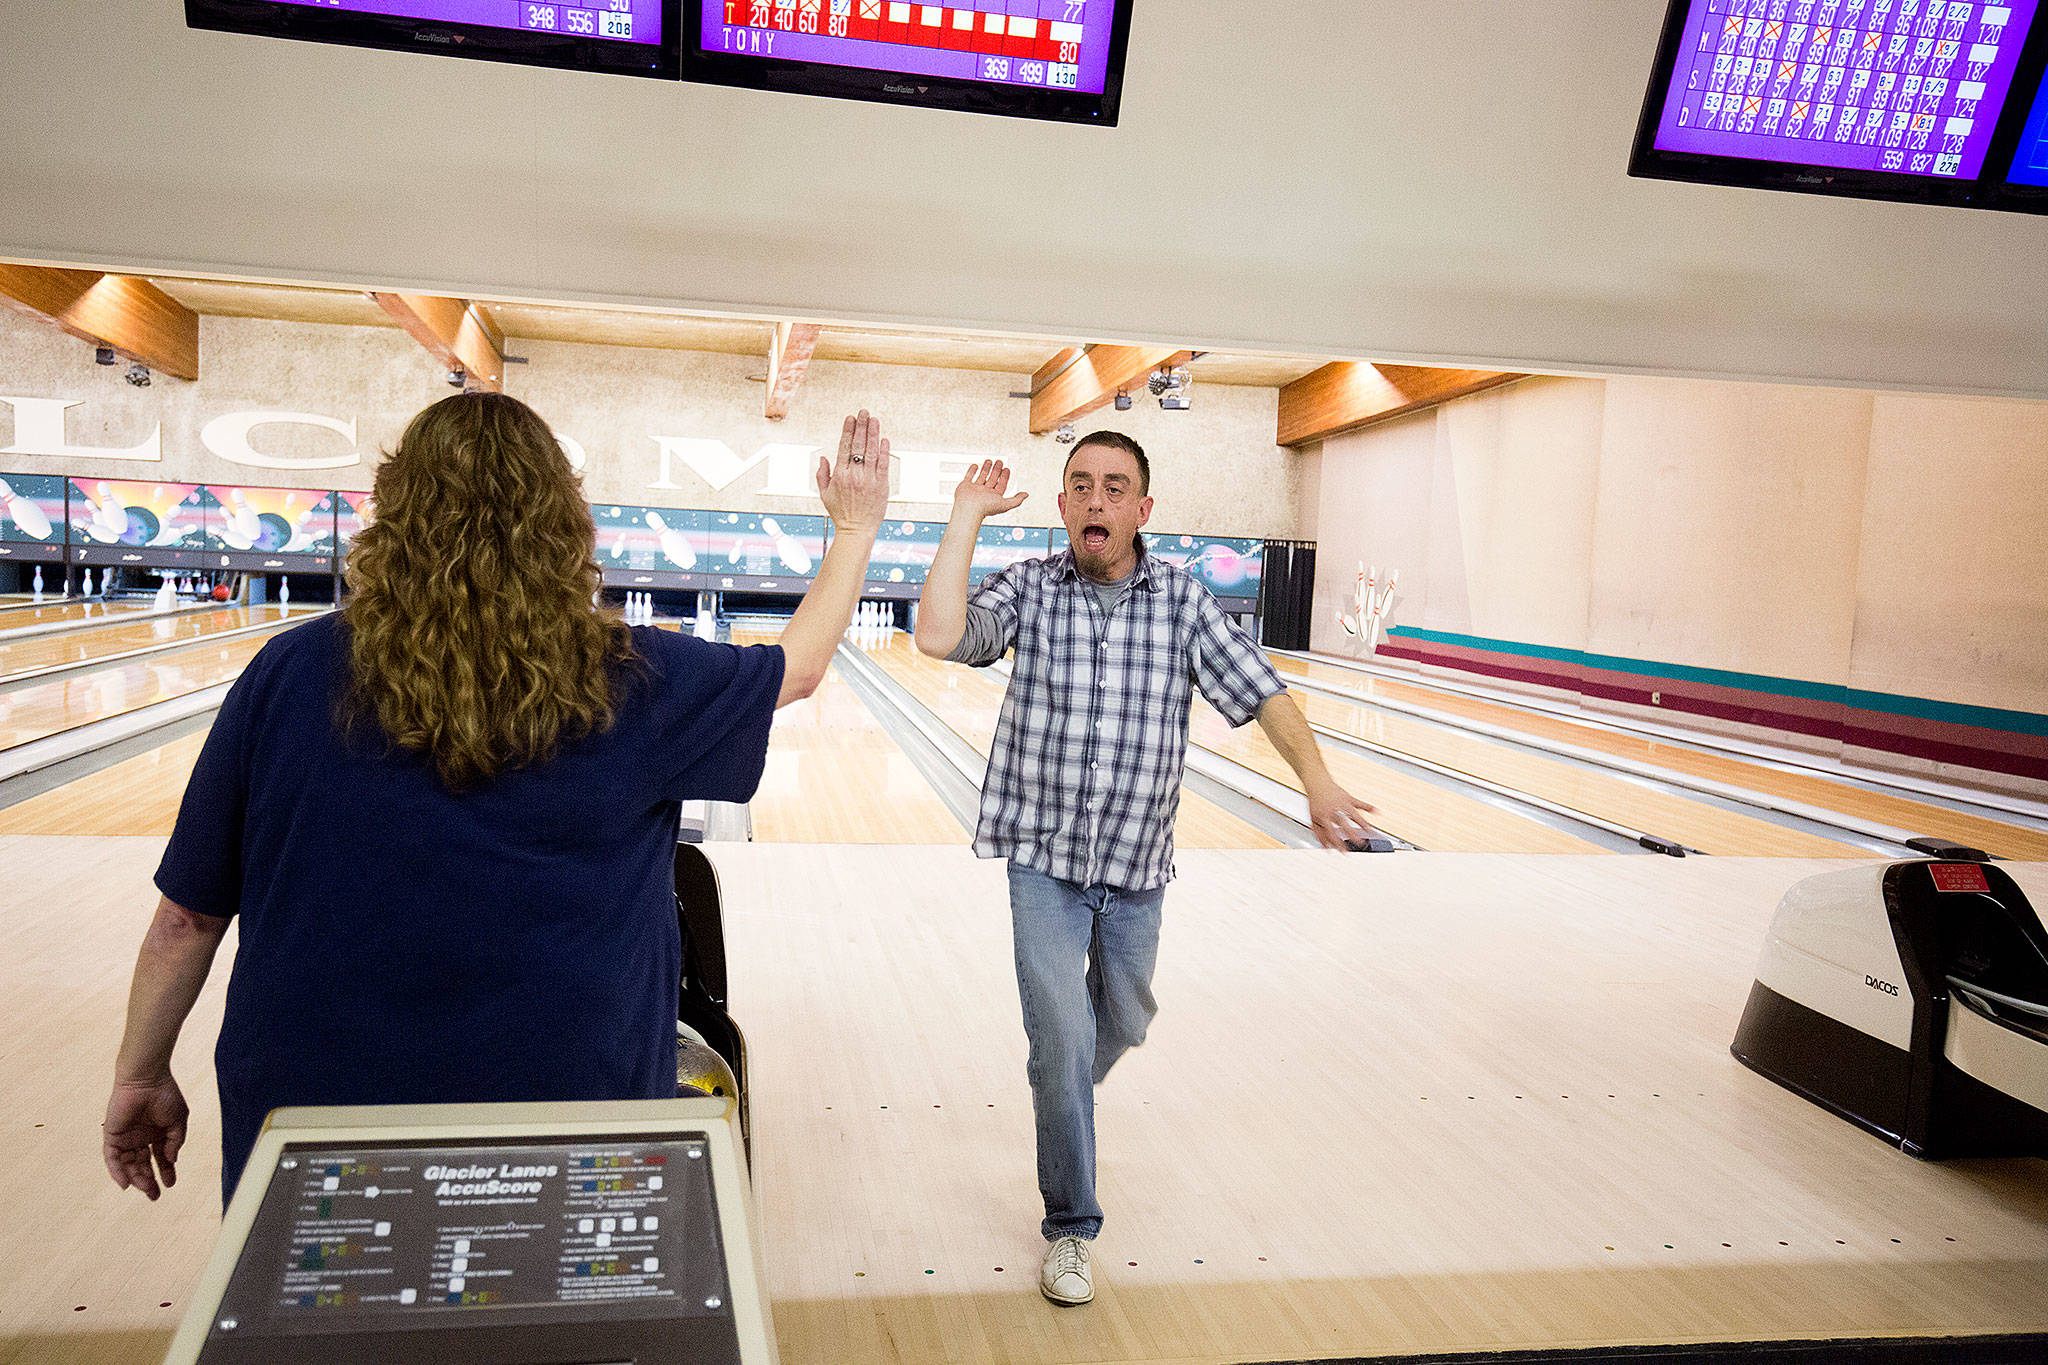 Family members Christi Aquilar high fives Tony Cea after bowling a strike at Glacier Lanes on Monday, Jan. 28, 2019 in Everett, Wa. Cea bowled a 300 recently, one of seven in his lifetime. Christie also has bowled a 300. (Andy Bronson / The Herald)